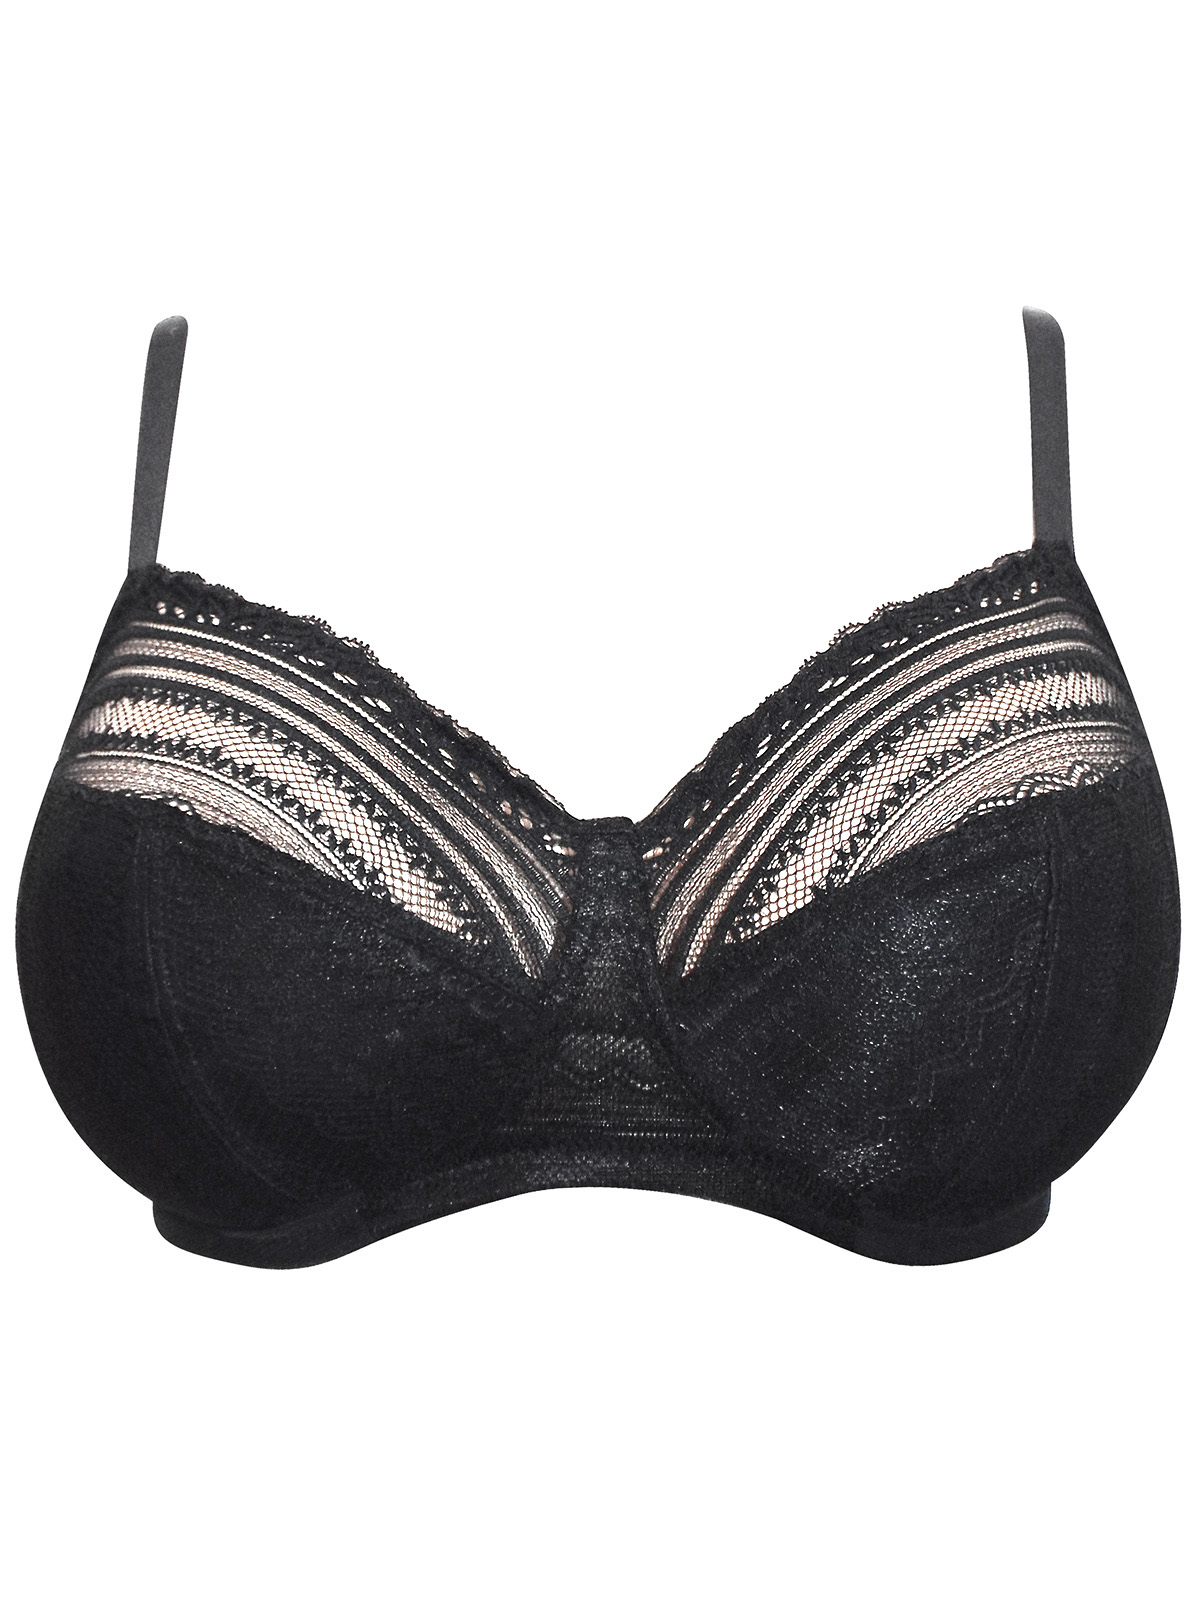 Brand New Ex M&S Underwired Lace Non-Padded Full Cup Bra Black Sizes 32-42 B-DD